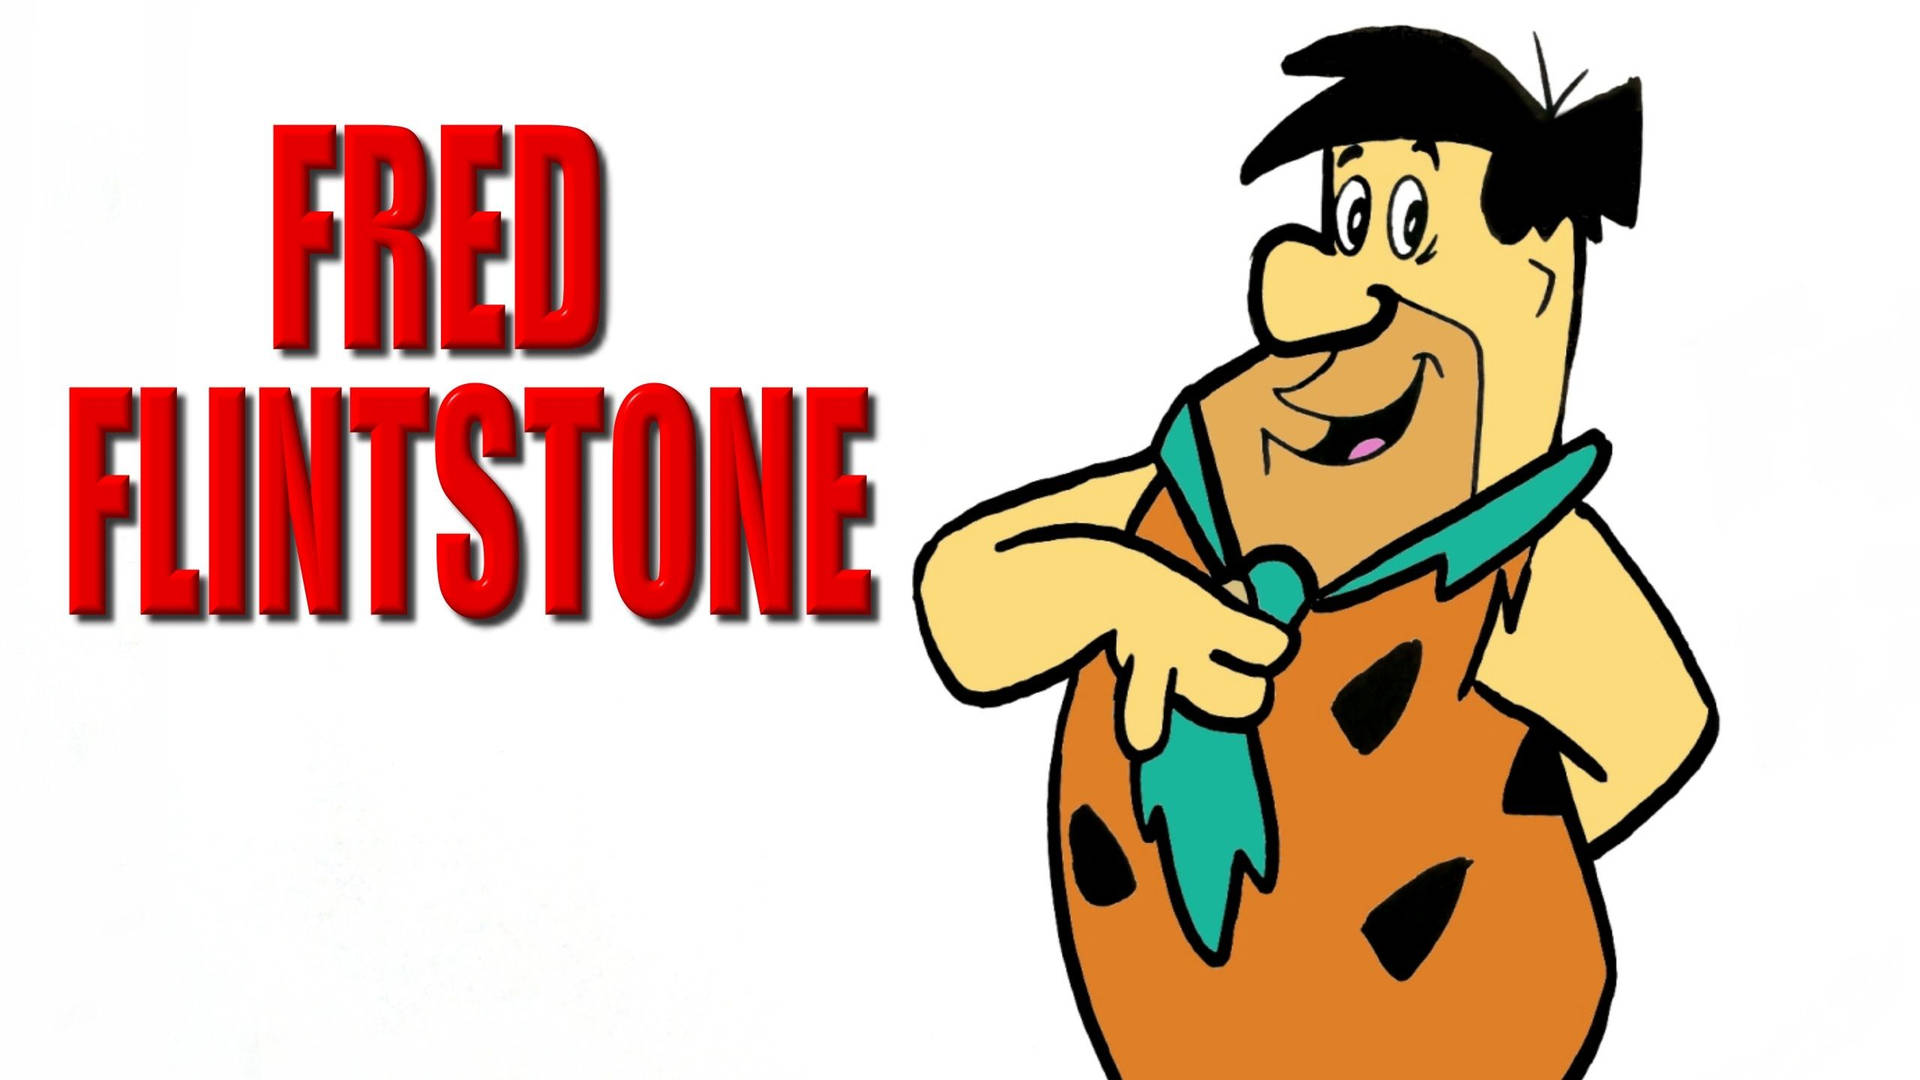 diane tyas recommends Image Of Fred Flintstone